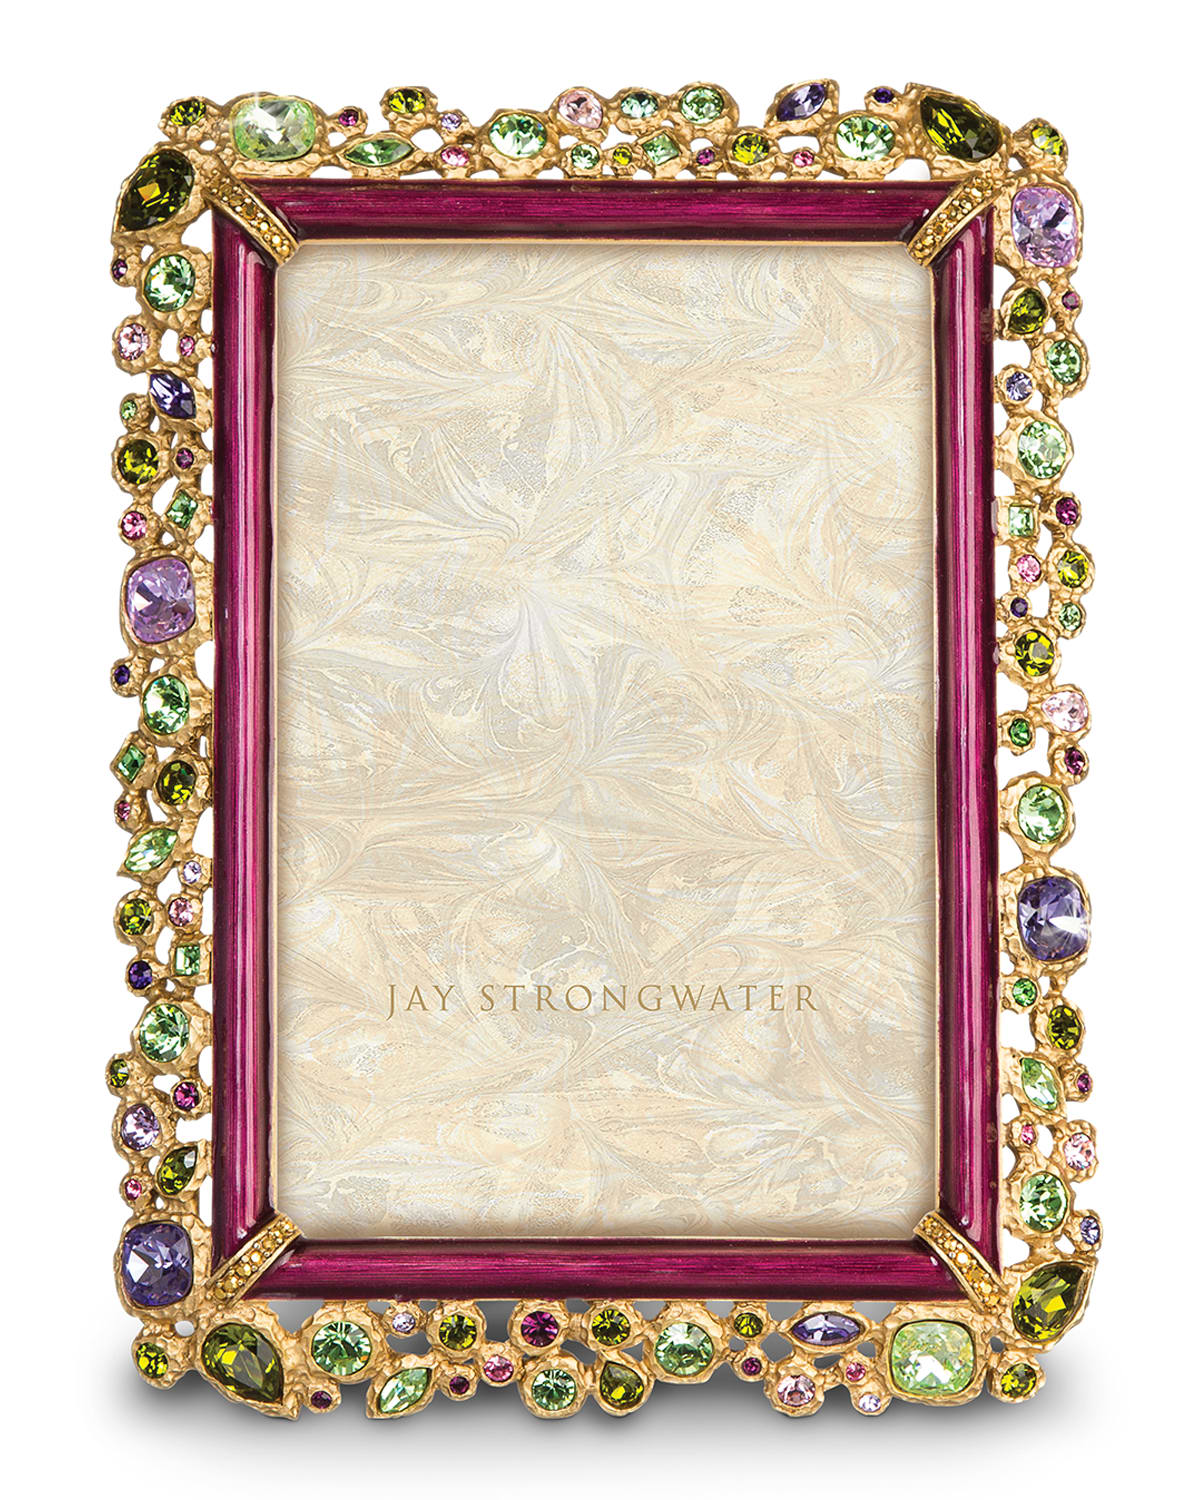 JAY STRONGWATER BEJEWELED 4" X 6" PICTURE FRAME